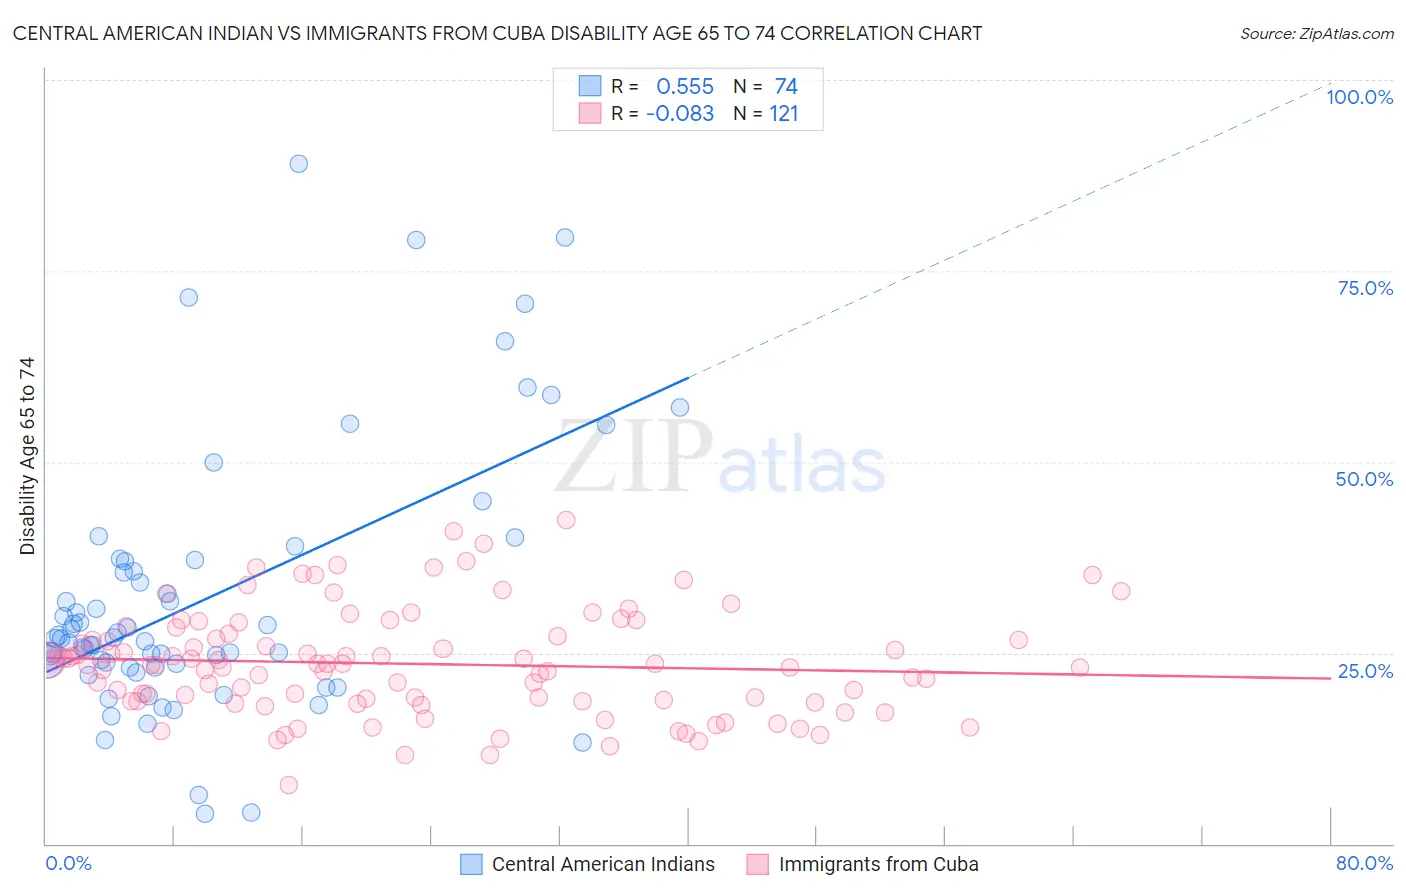 Central American Indian vs Immigrants from Cuba Disability Age 65 to 74